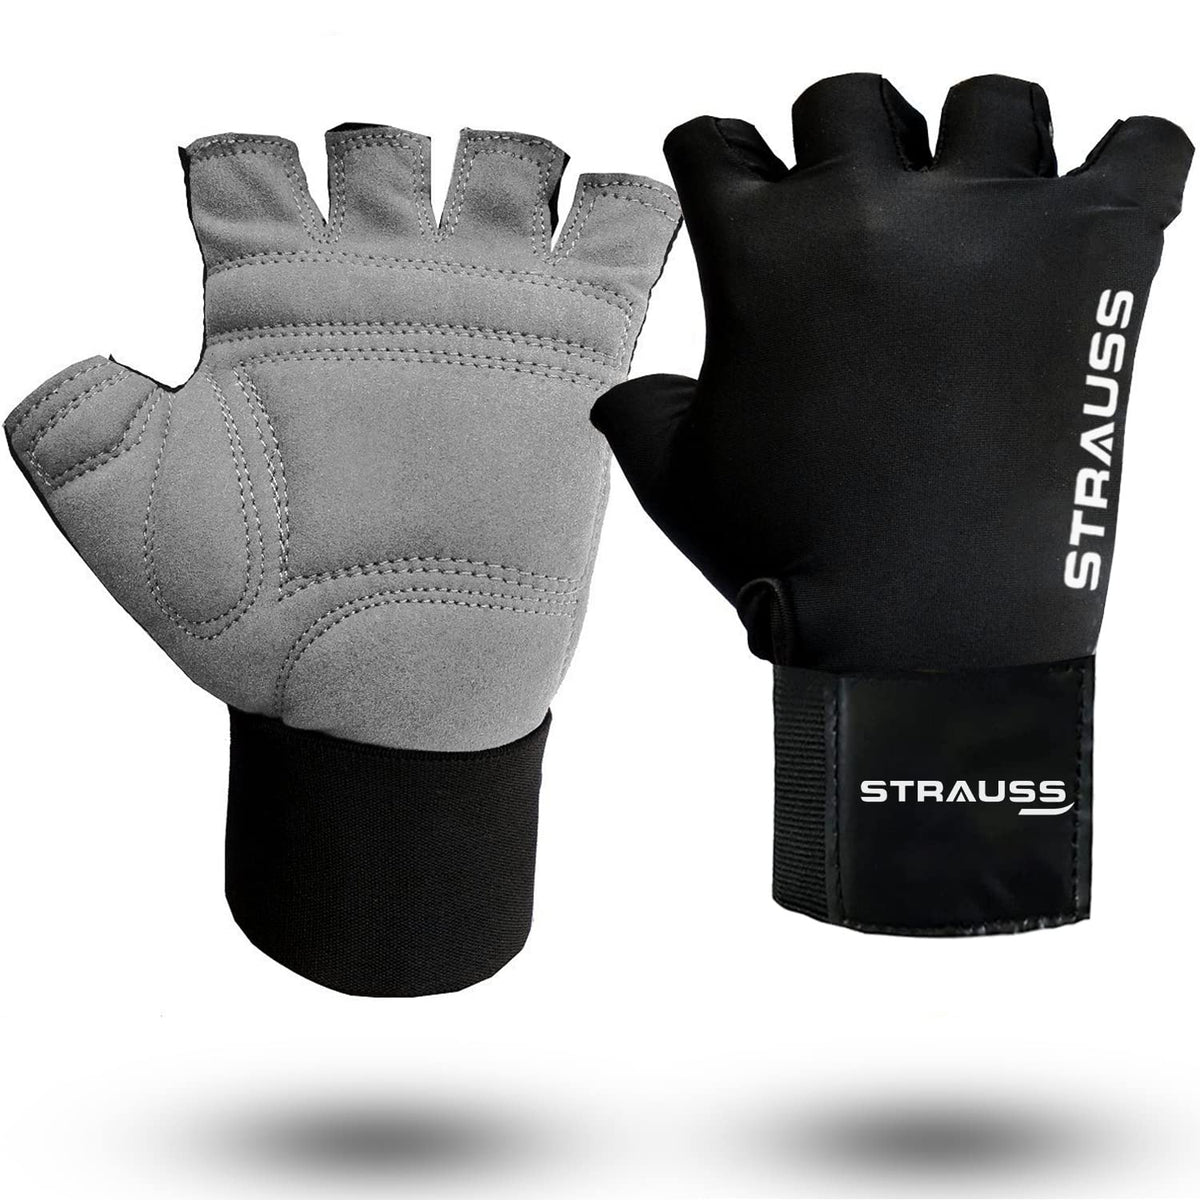 STRAUSS Suede Gym Gloves for Weightlifting, Training, Cycling, Exercise & Gym | Half Finger Design, 8mm Foam Cushioning, Anti-Slip & Breathable Lycra Material, (Grey/Black), (Large)